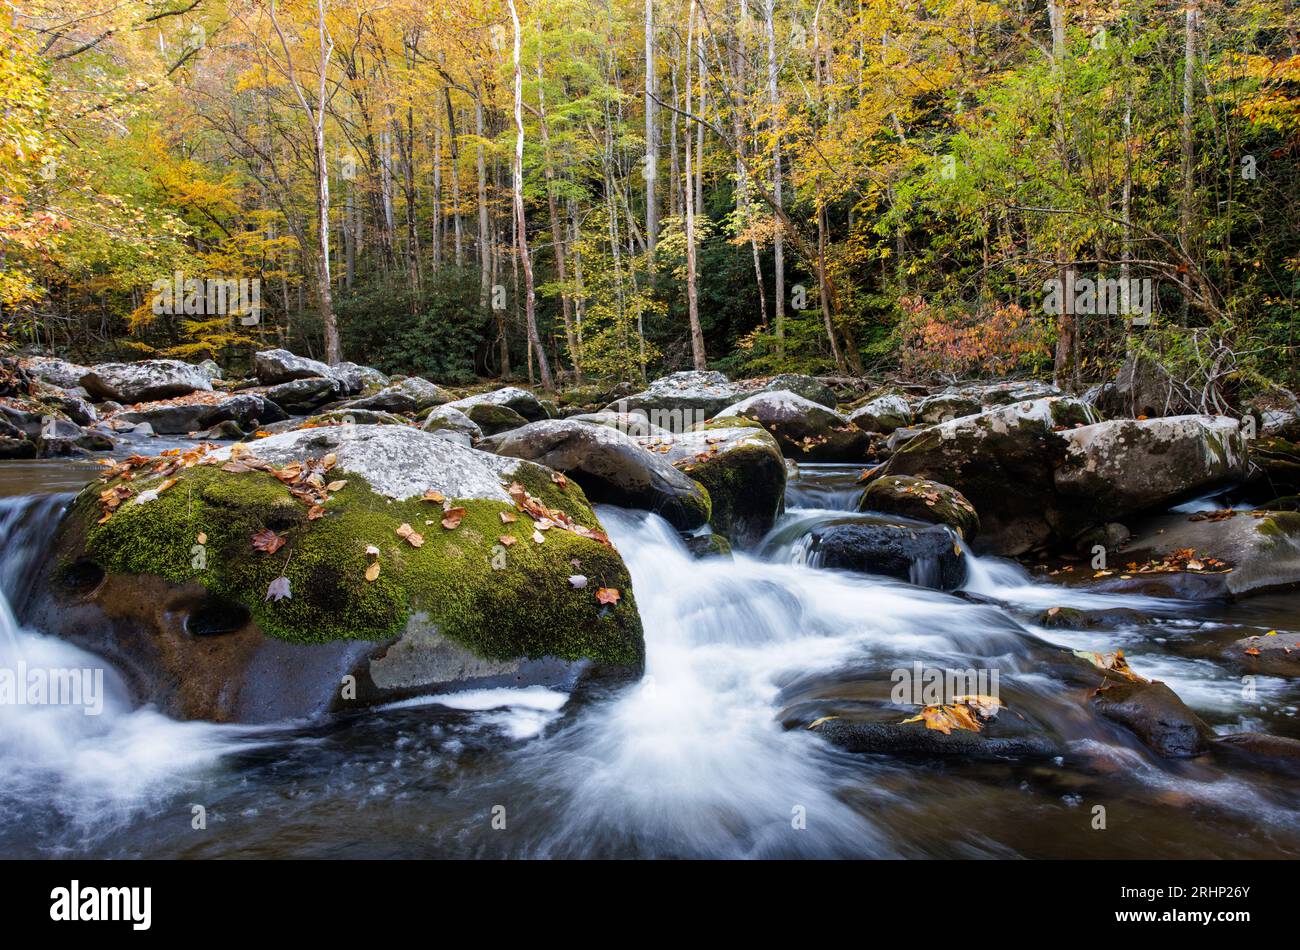 Middle Prong Little River, Great Smoky Mountains National Park - Sevier County, Tennessee. The Middle Prong Little River flows through a colorful autu Stock Photo